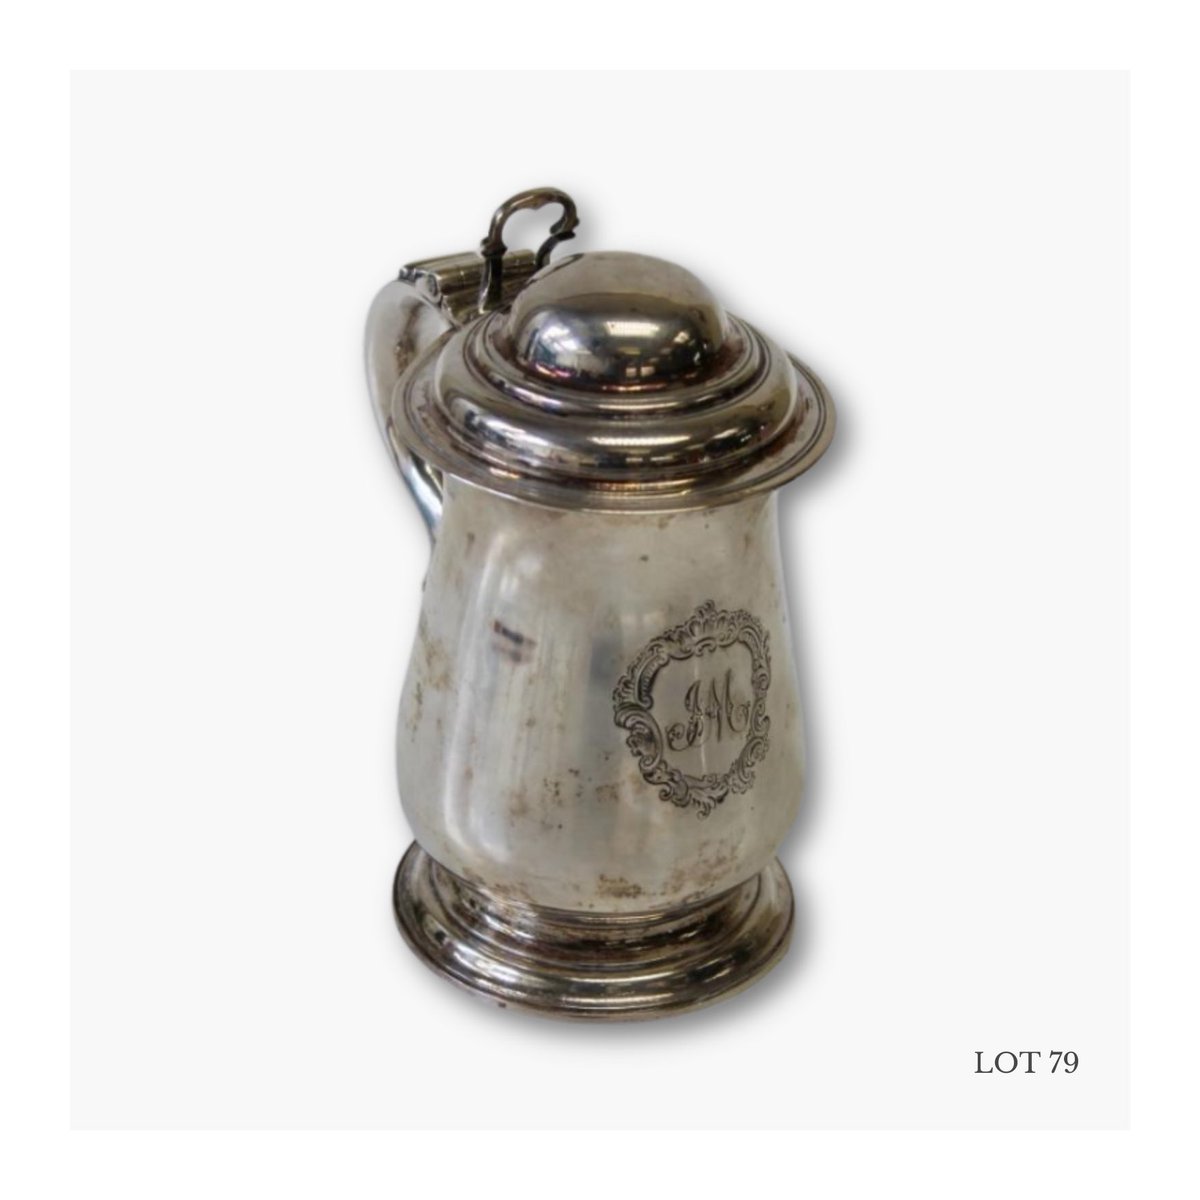 ⭐️COMING UP⭐️ In our 24th April Auction! Browse & Bid 👉 hansonslive.hansonsauctioneers.co.uk/m/view-auction… #auction #sterlingsilver #antique #GeorgeIII #tankard #charmbracelet #gold #art #painting #oiloncanvas #fineart #french #belgian #19thcentury #gun #collectibles #collectorsitem #rarefinds